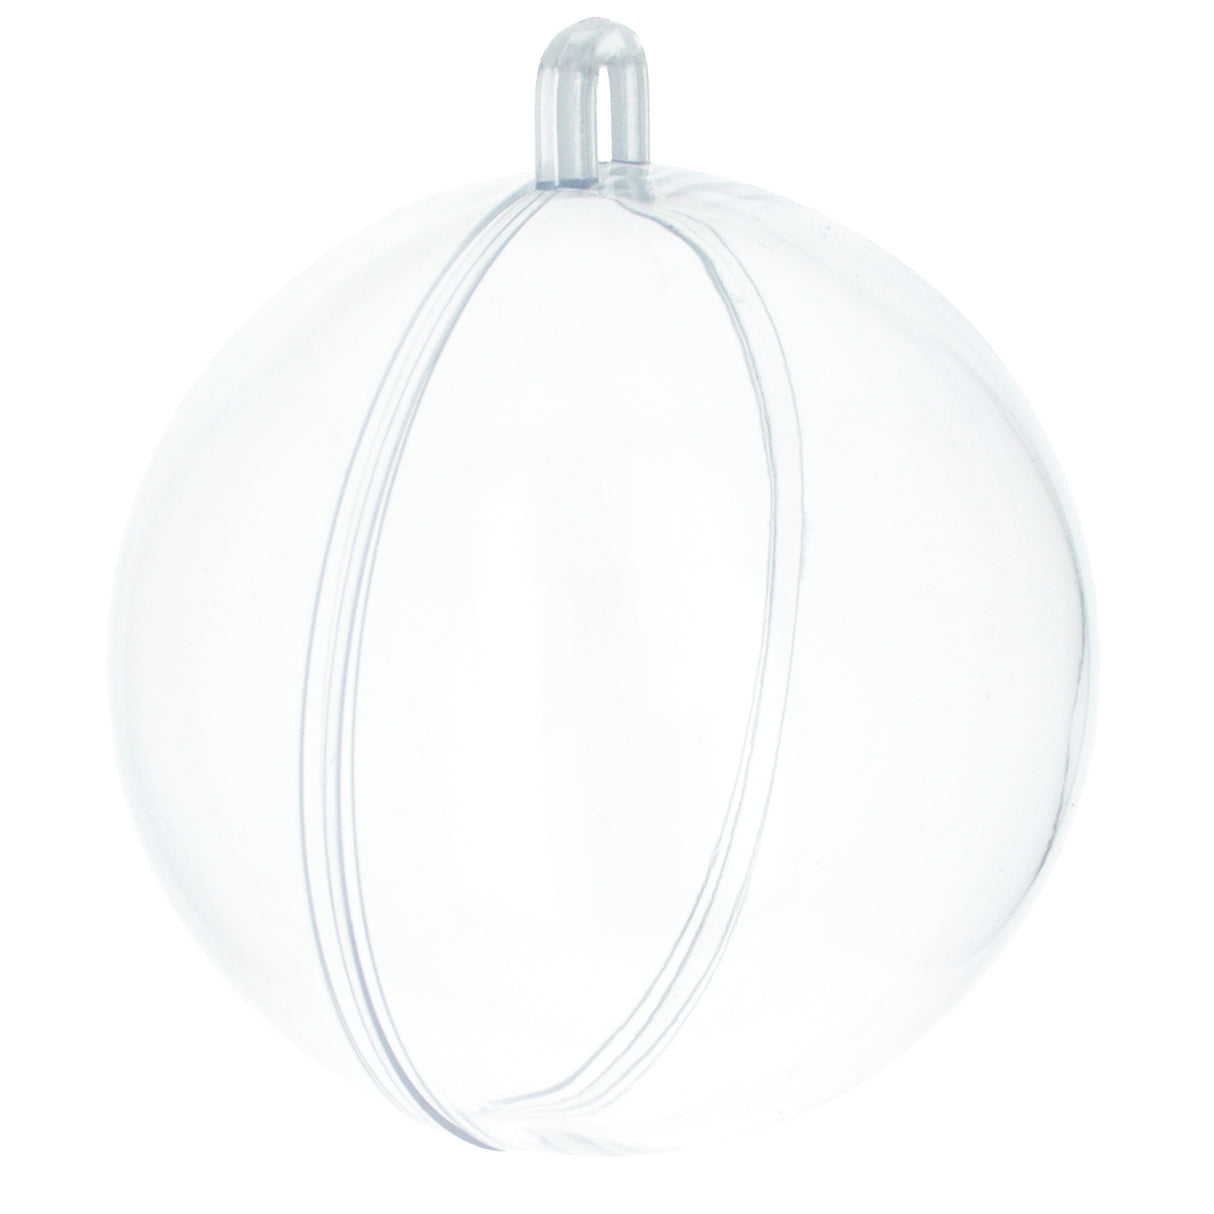 Plastic Openable Fillable Clear Plastic Christmas Ball Ornament DIY Craft 3 Inches in Clear color Round